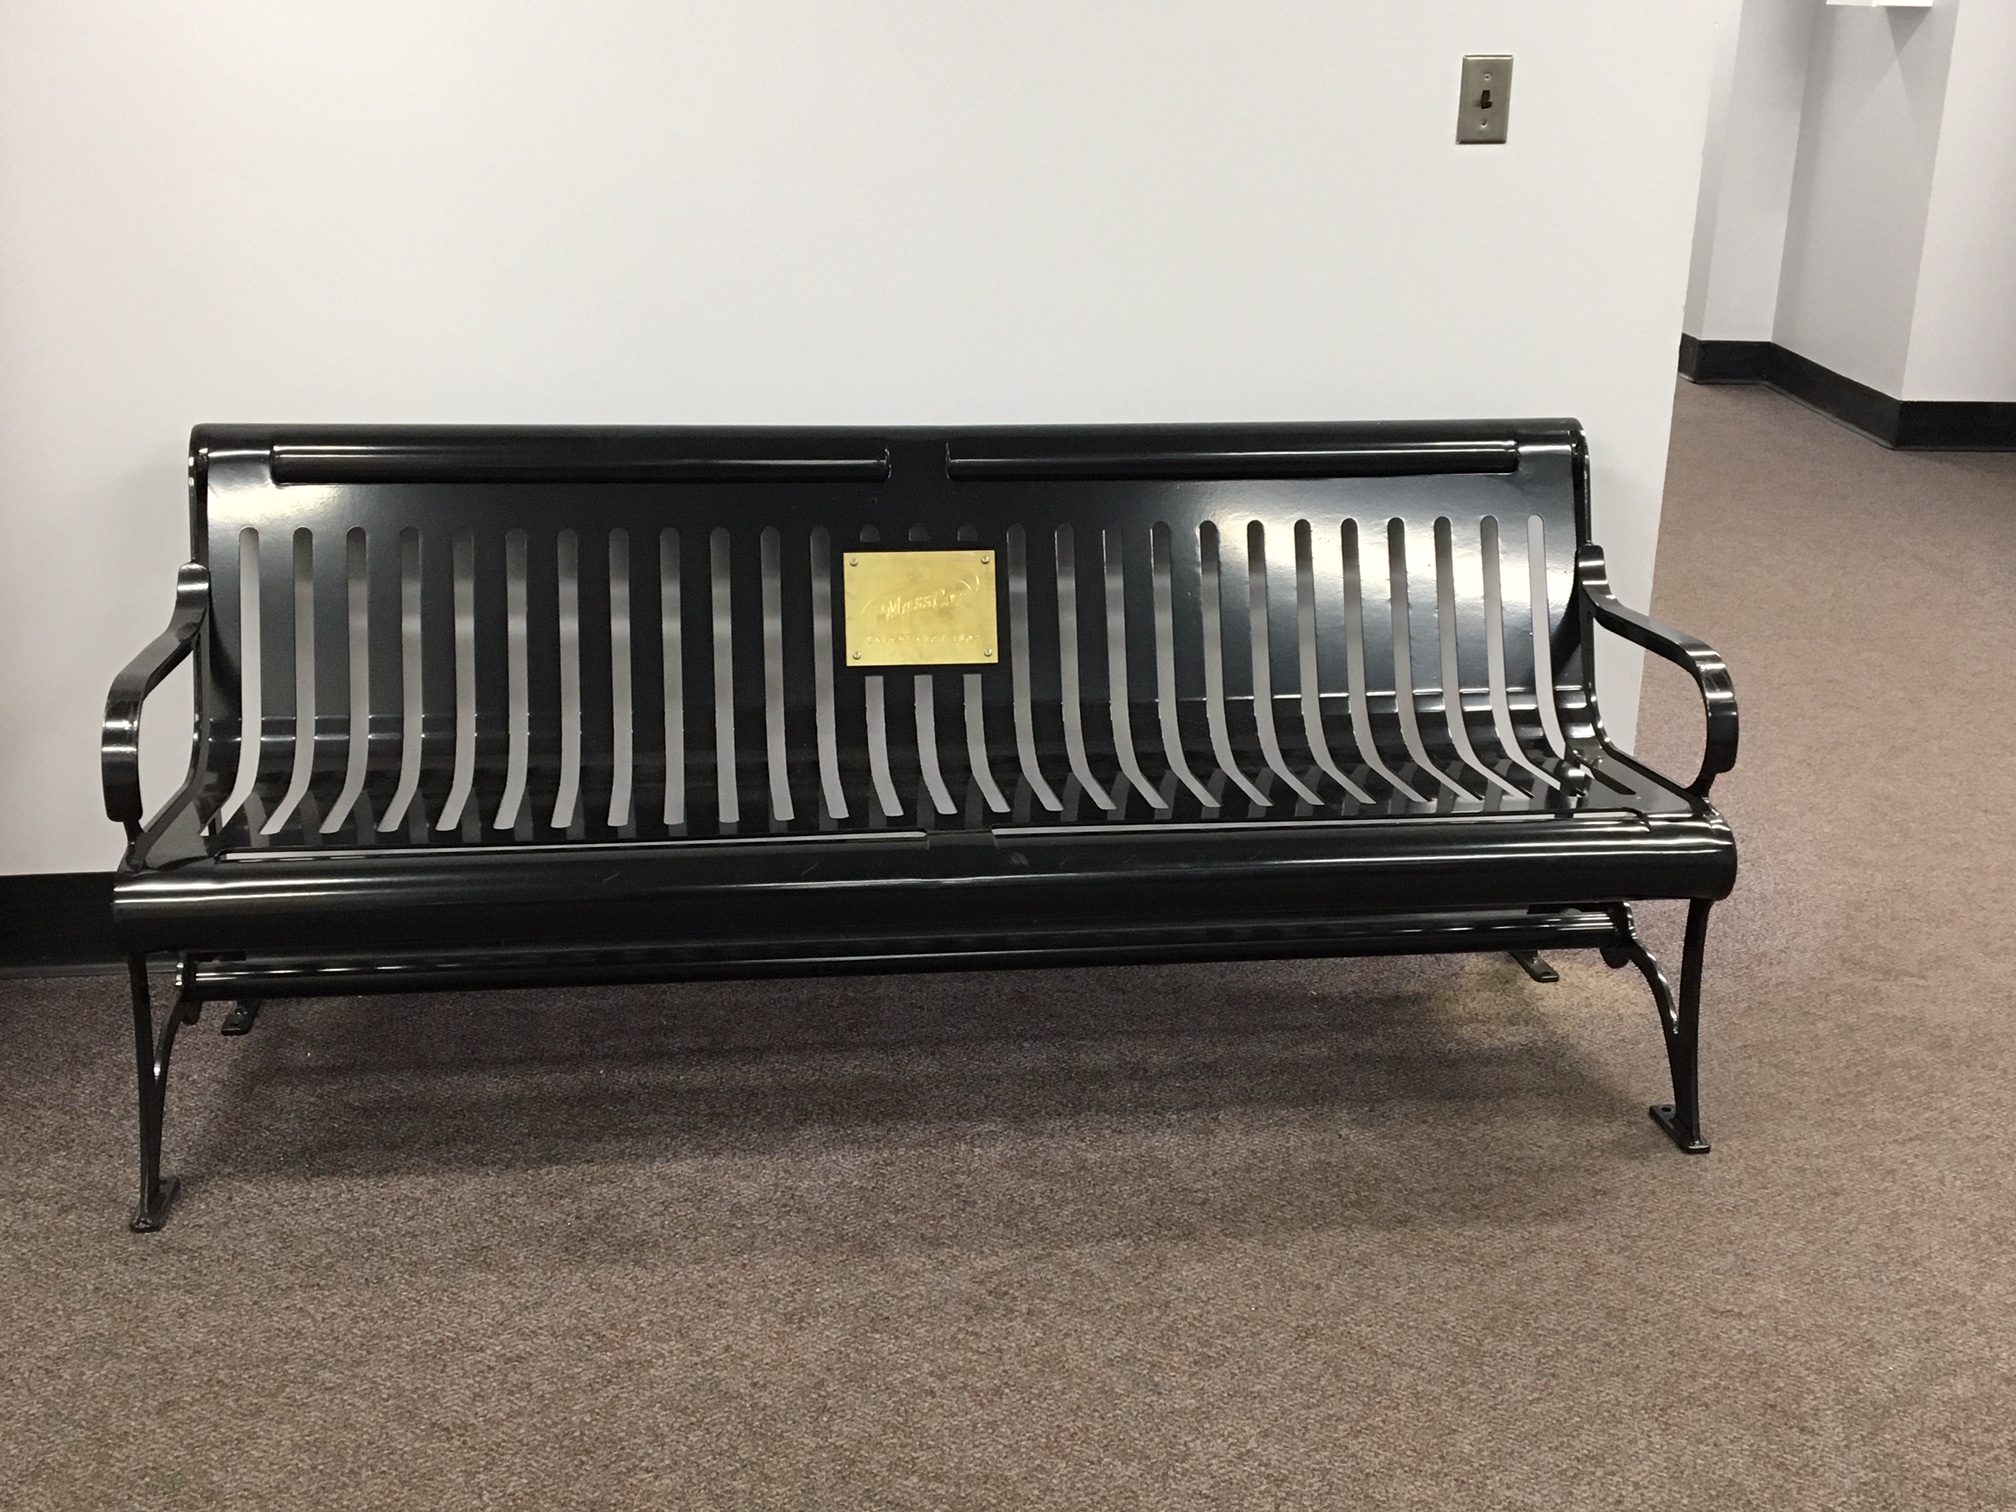 Standard Bench with Plaque